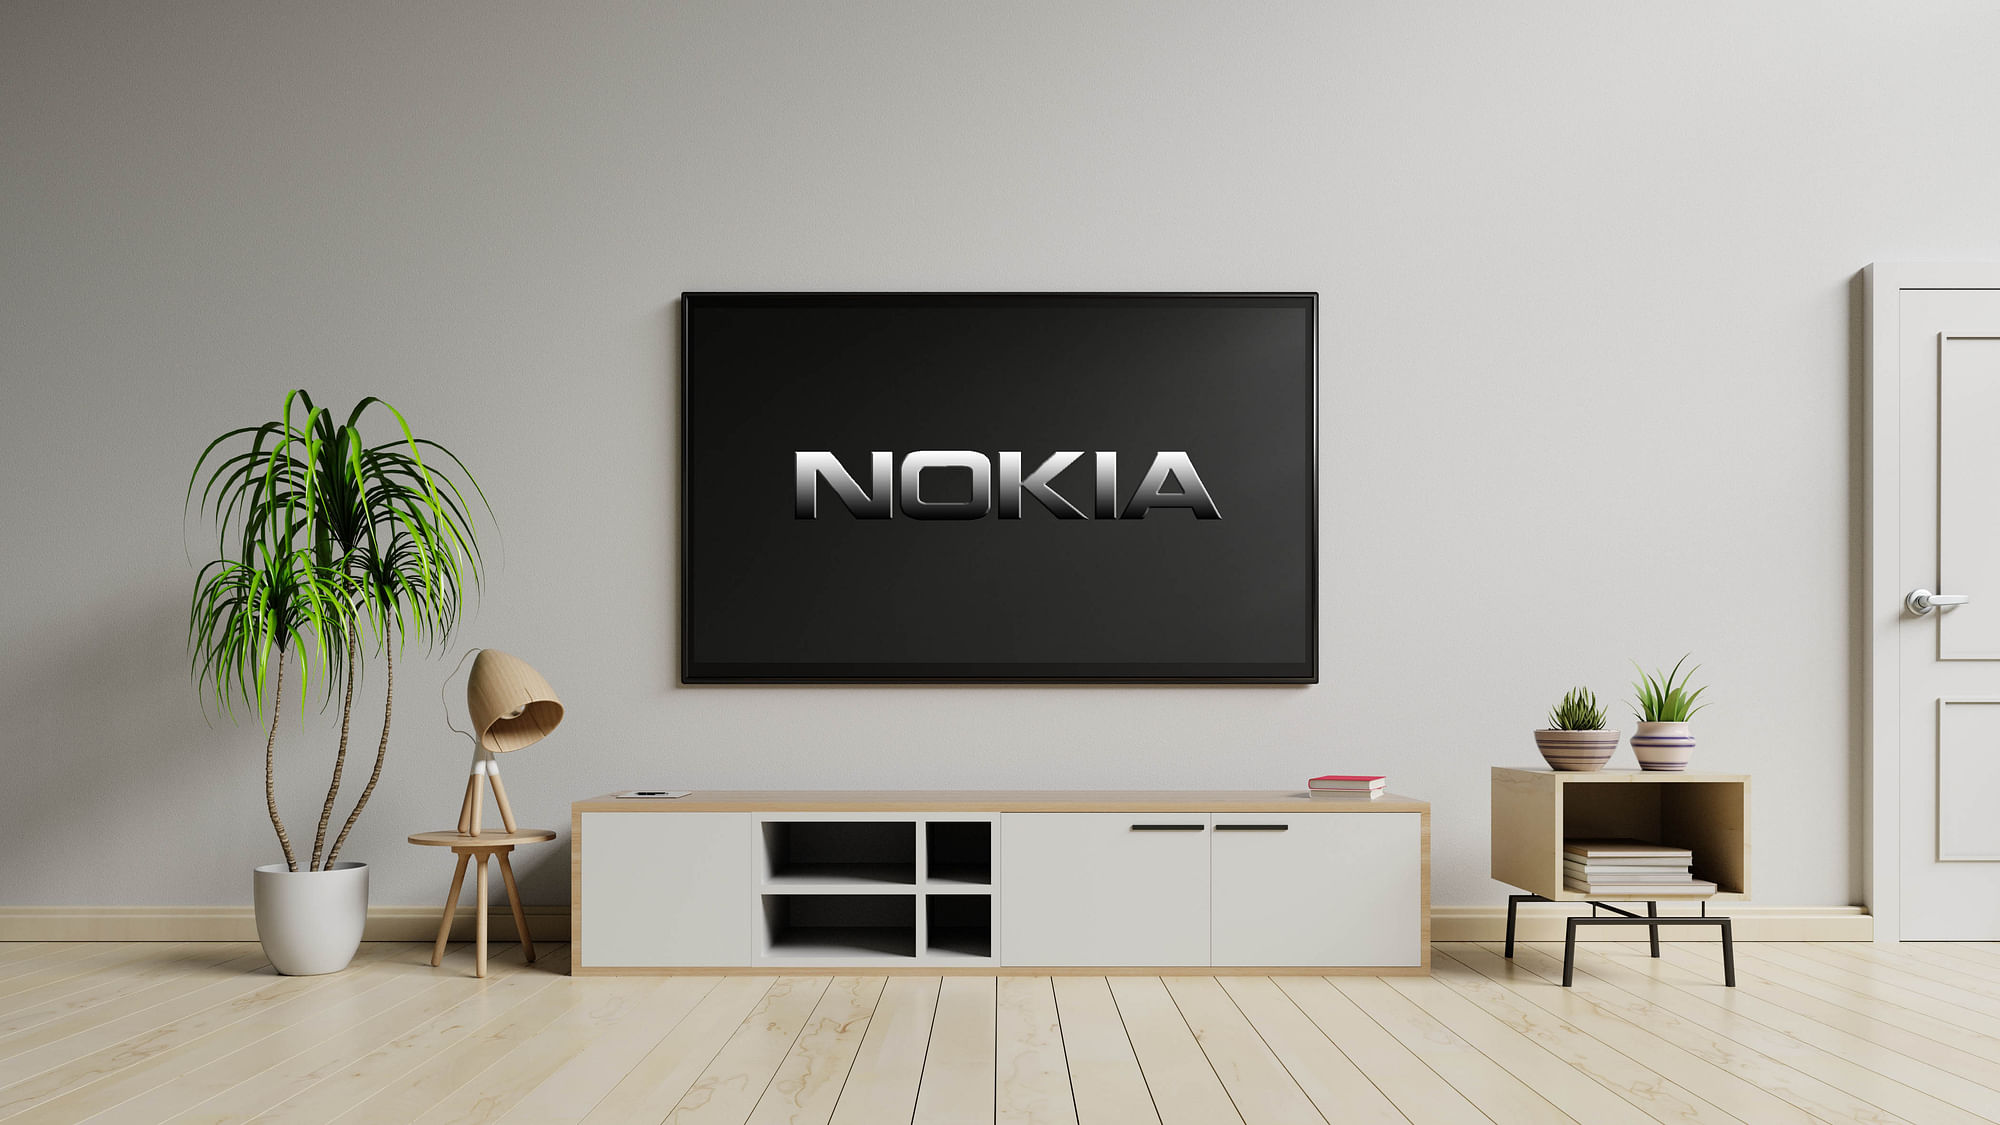 The Nokia smart TV is expected to come bundled with OTT apps like Netflix and Prime Video.